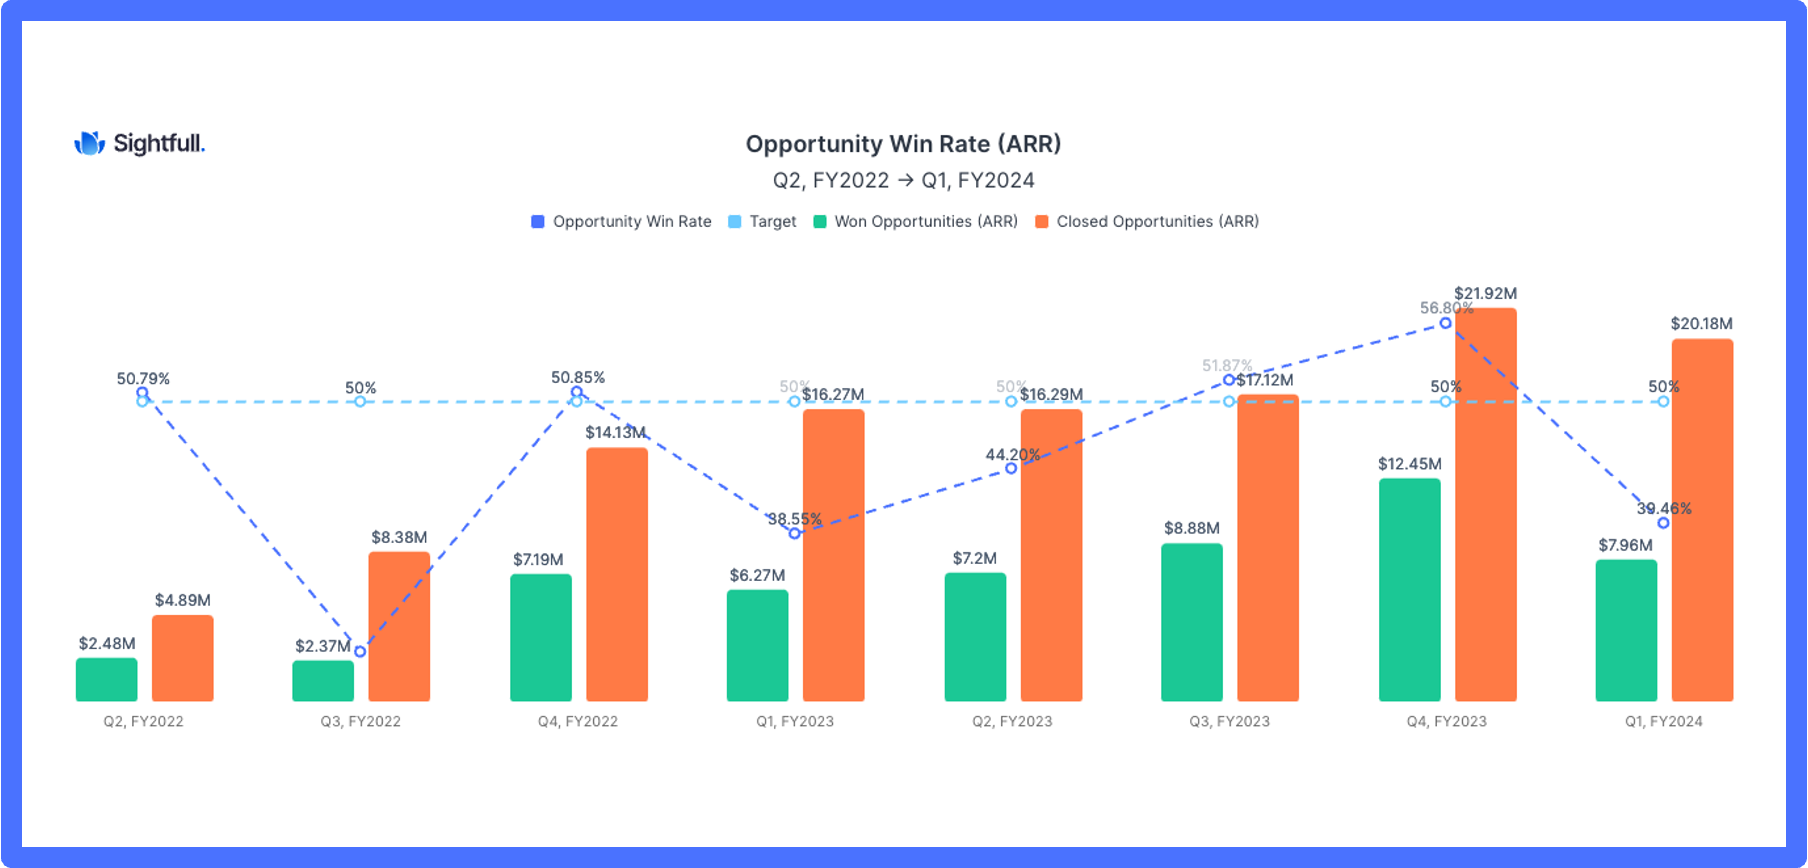 Opportunity Win Rate